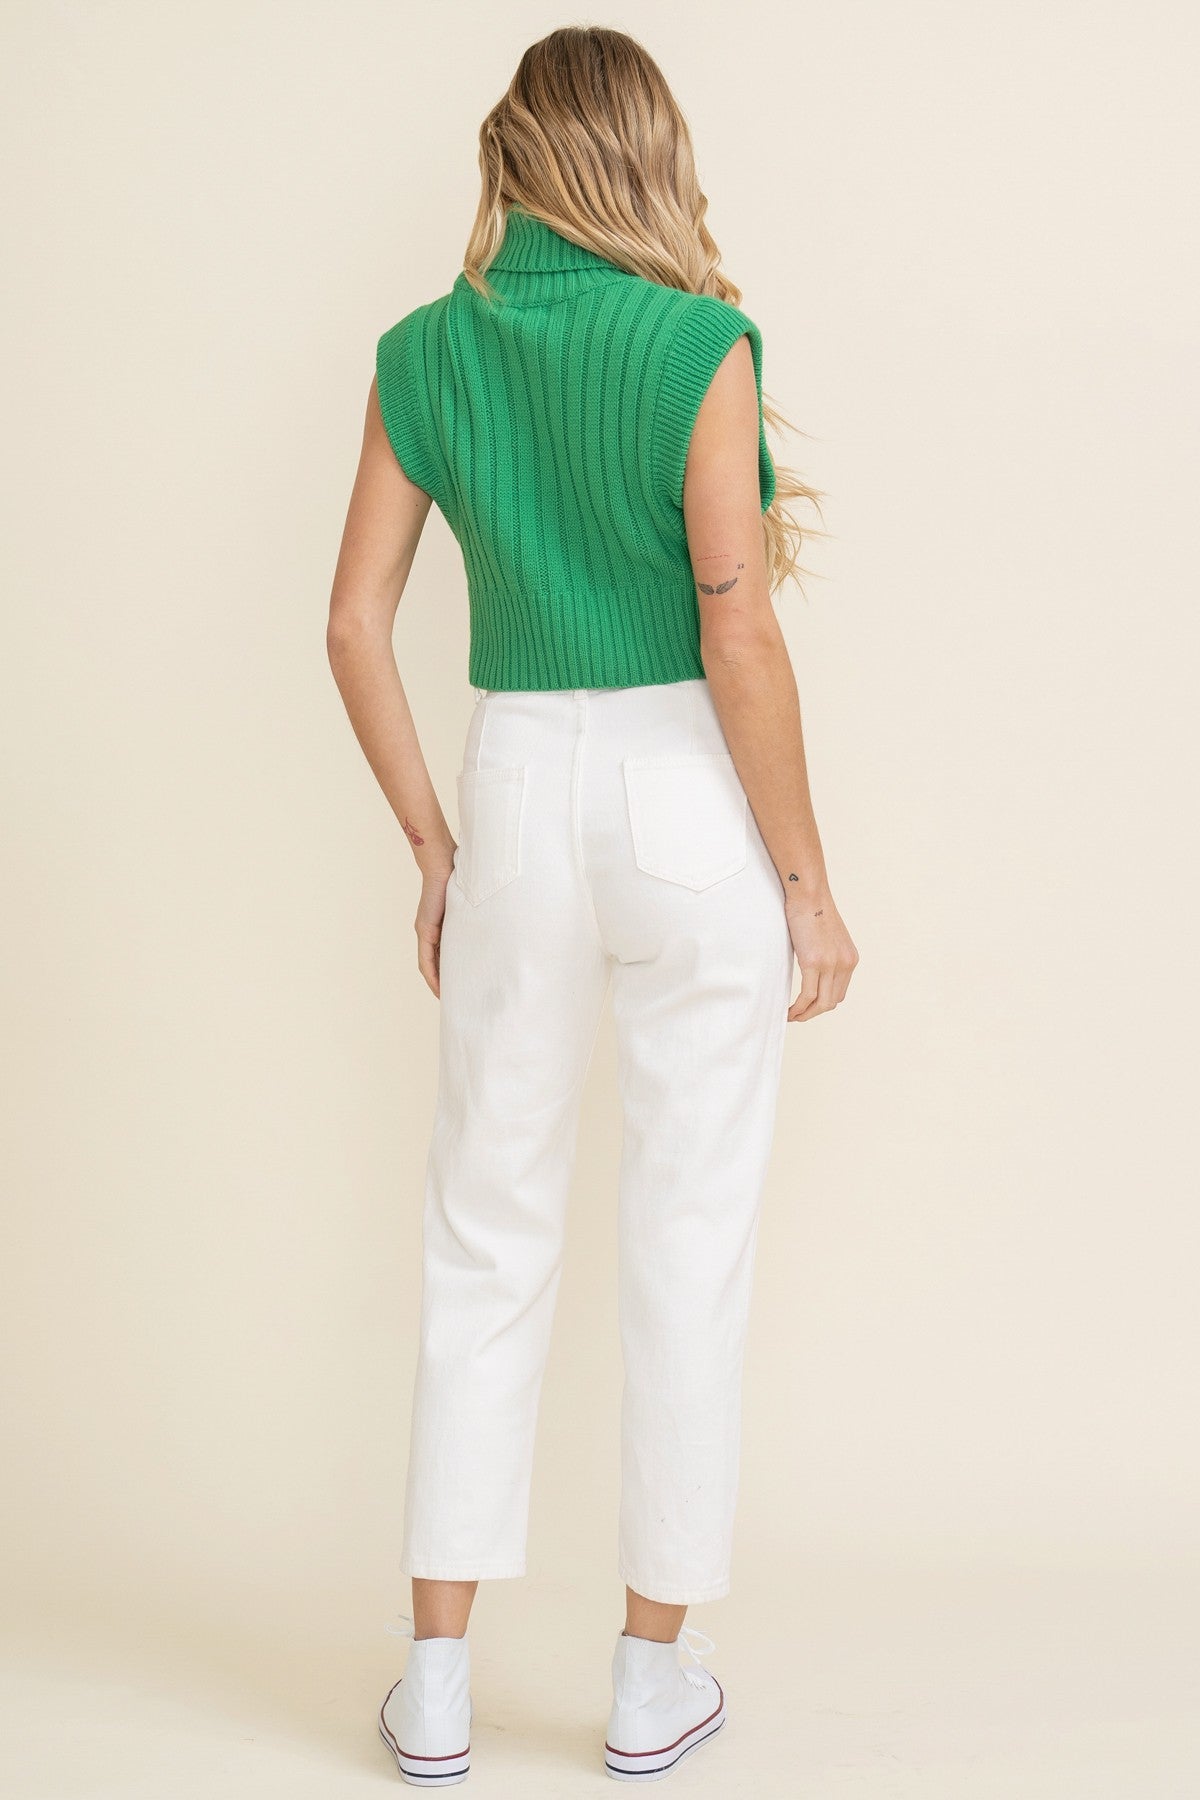 Cropped knit sleeveless sweater in green features a loose turtleneck and oversized fit. Back view.